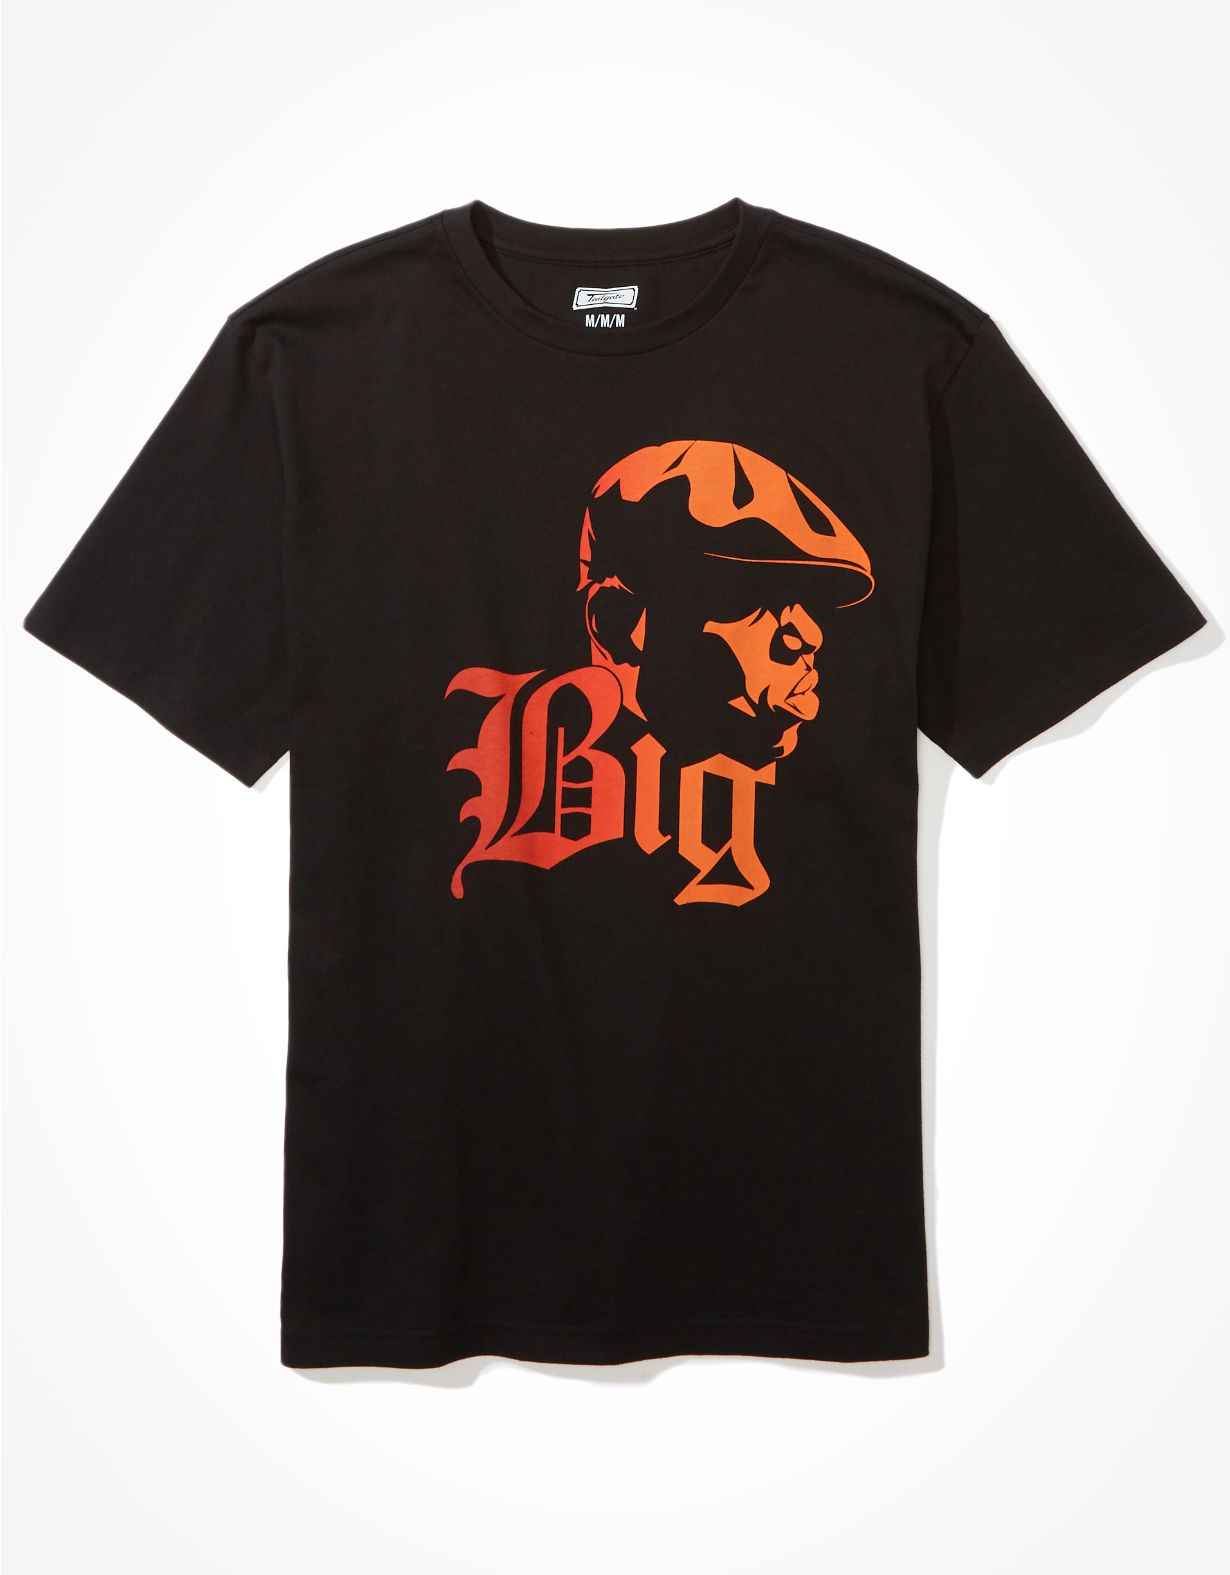 Tailgate Men's Notorious B.I.G. Graphic T-Shirt